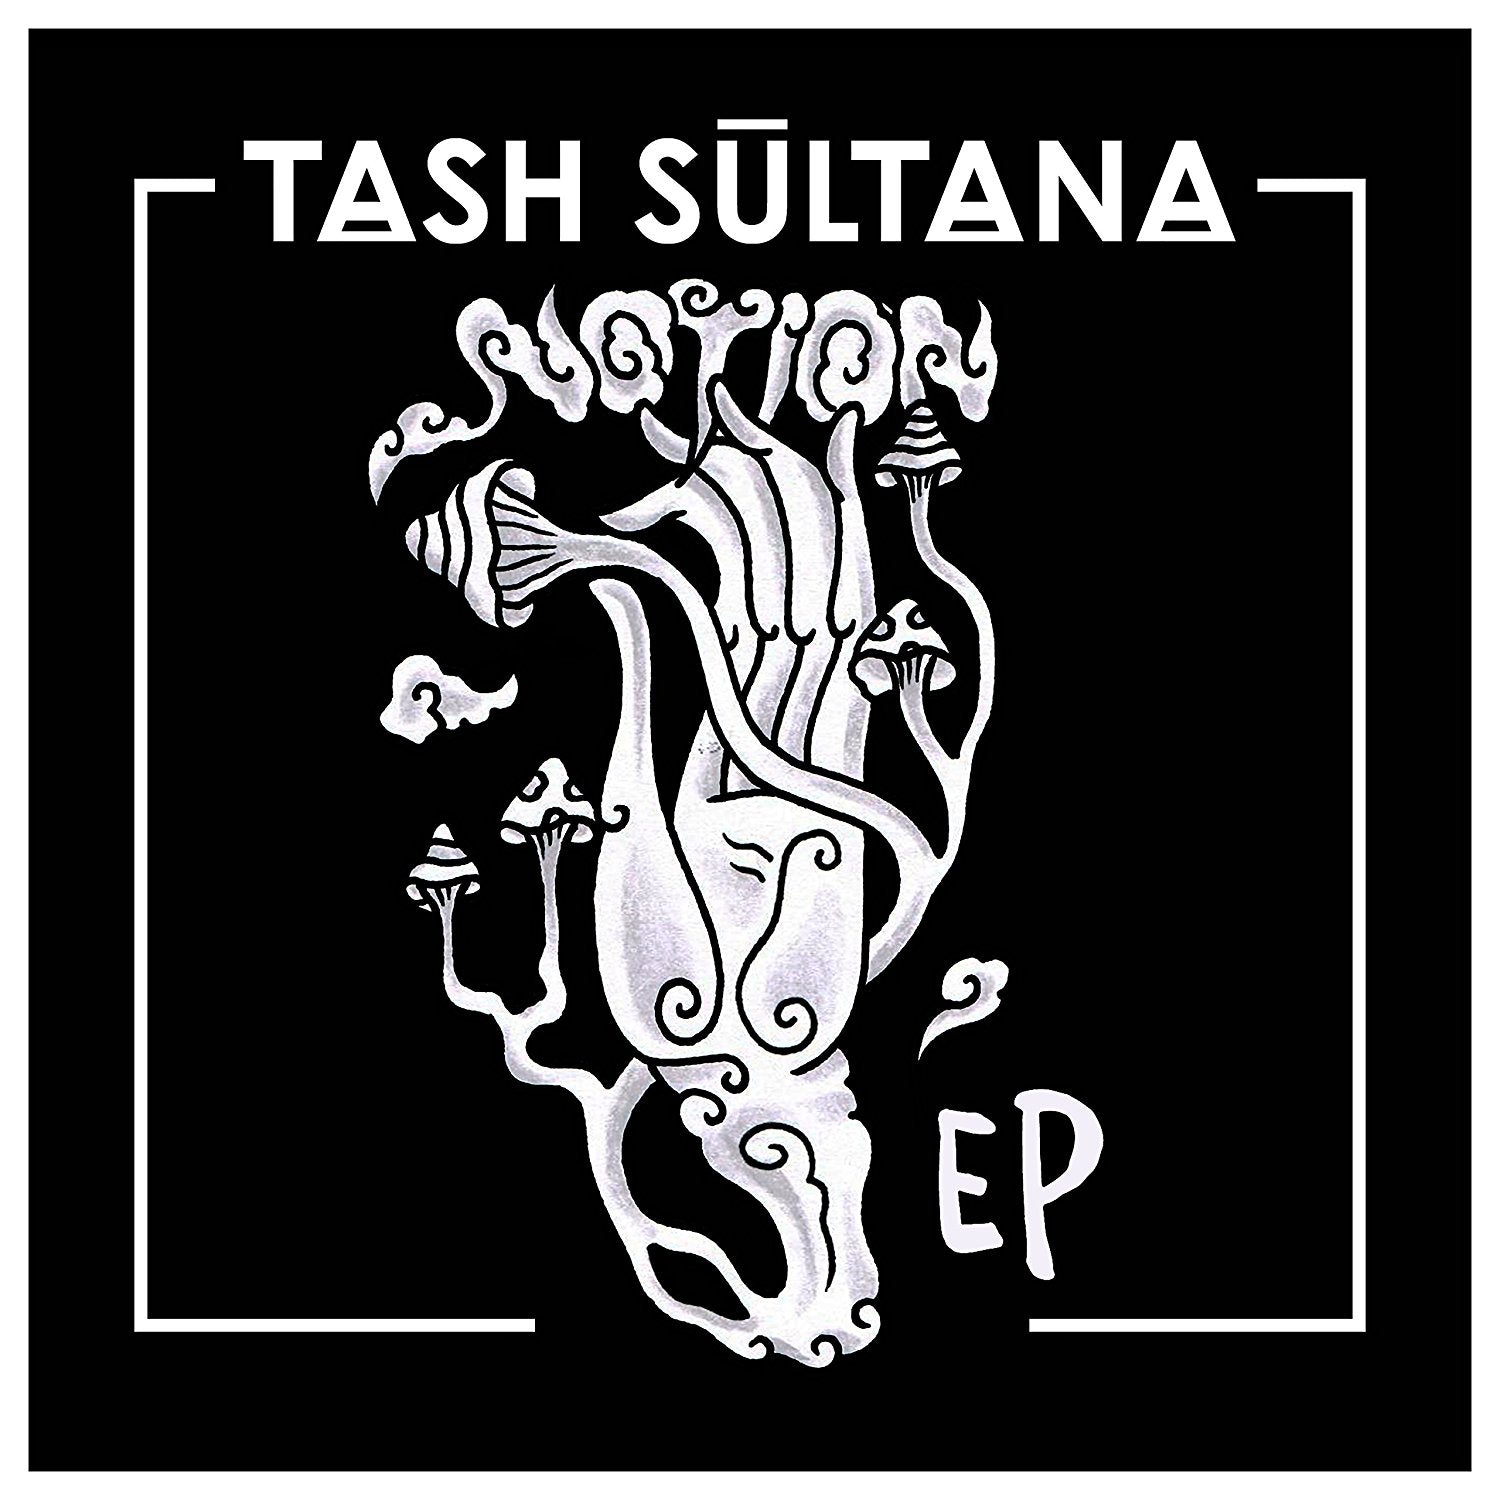 Tash Sultana ‎– Notion EP - New Record 2017 Mom + Pop Europe Green Vinyl, Poster & Download - Indie Pop / Psychedelic